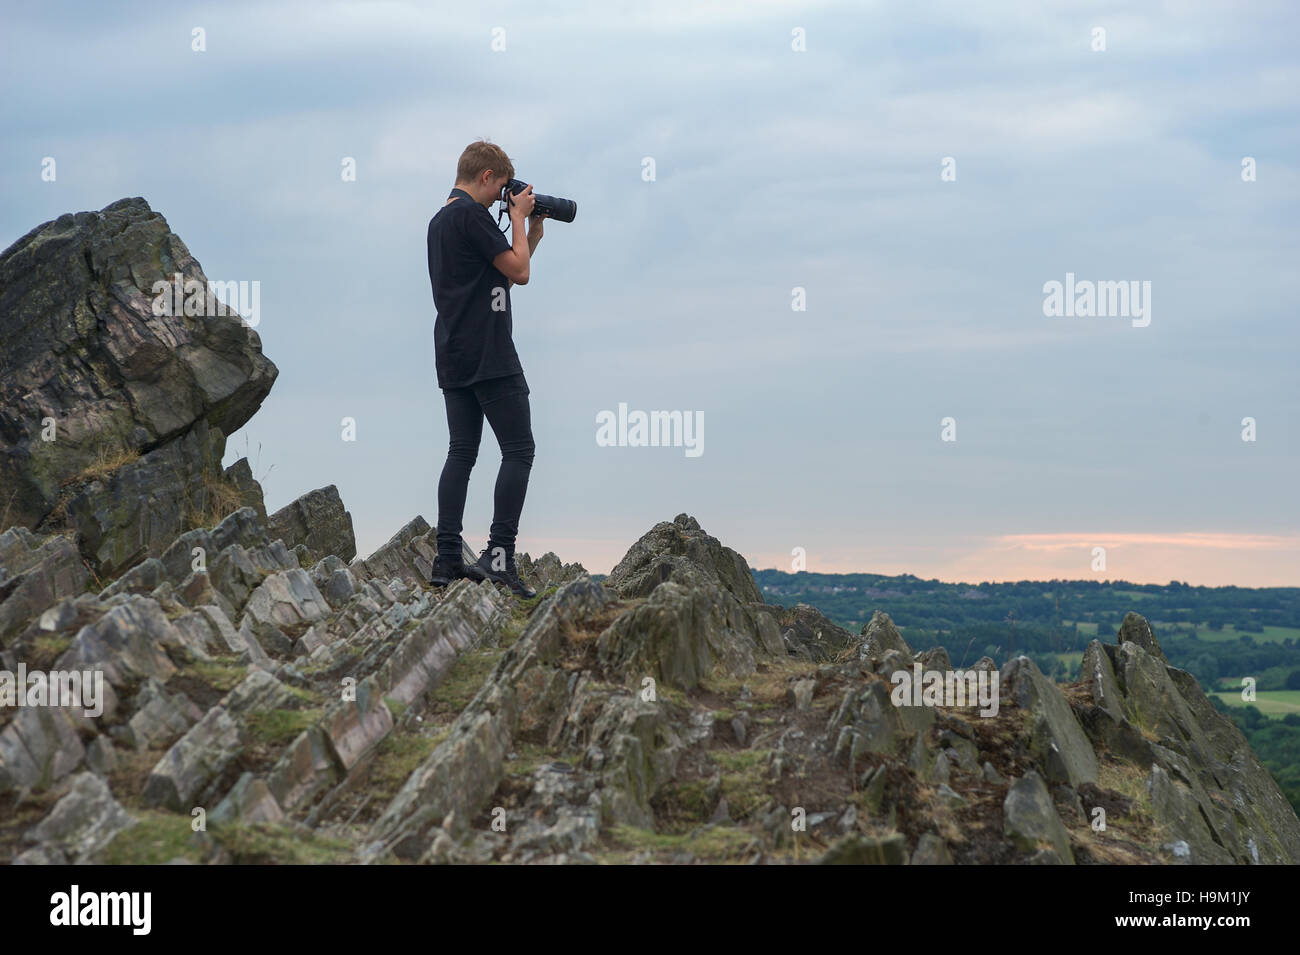 A young photographer takes a photo on a rocky ridge. Stock Photo